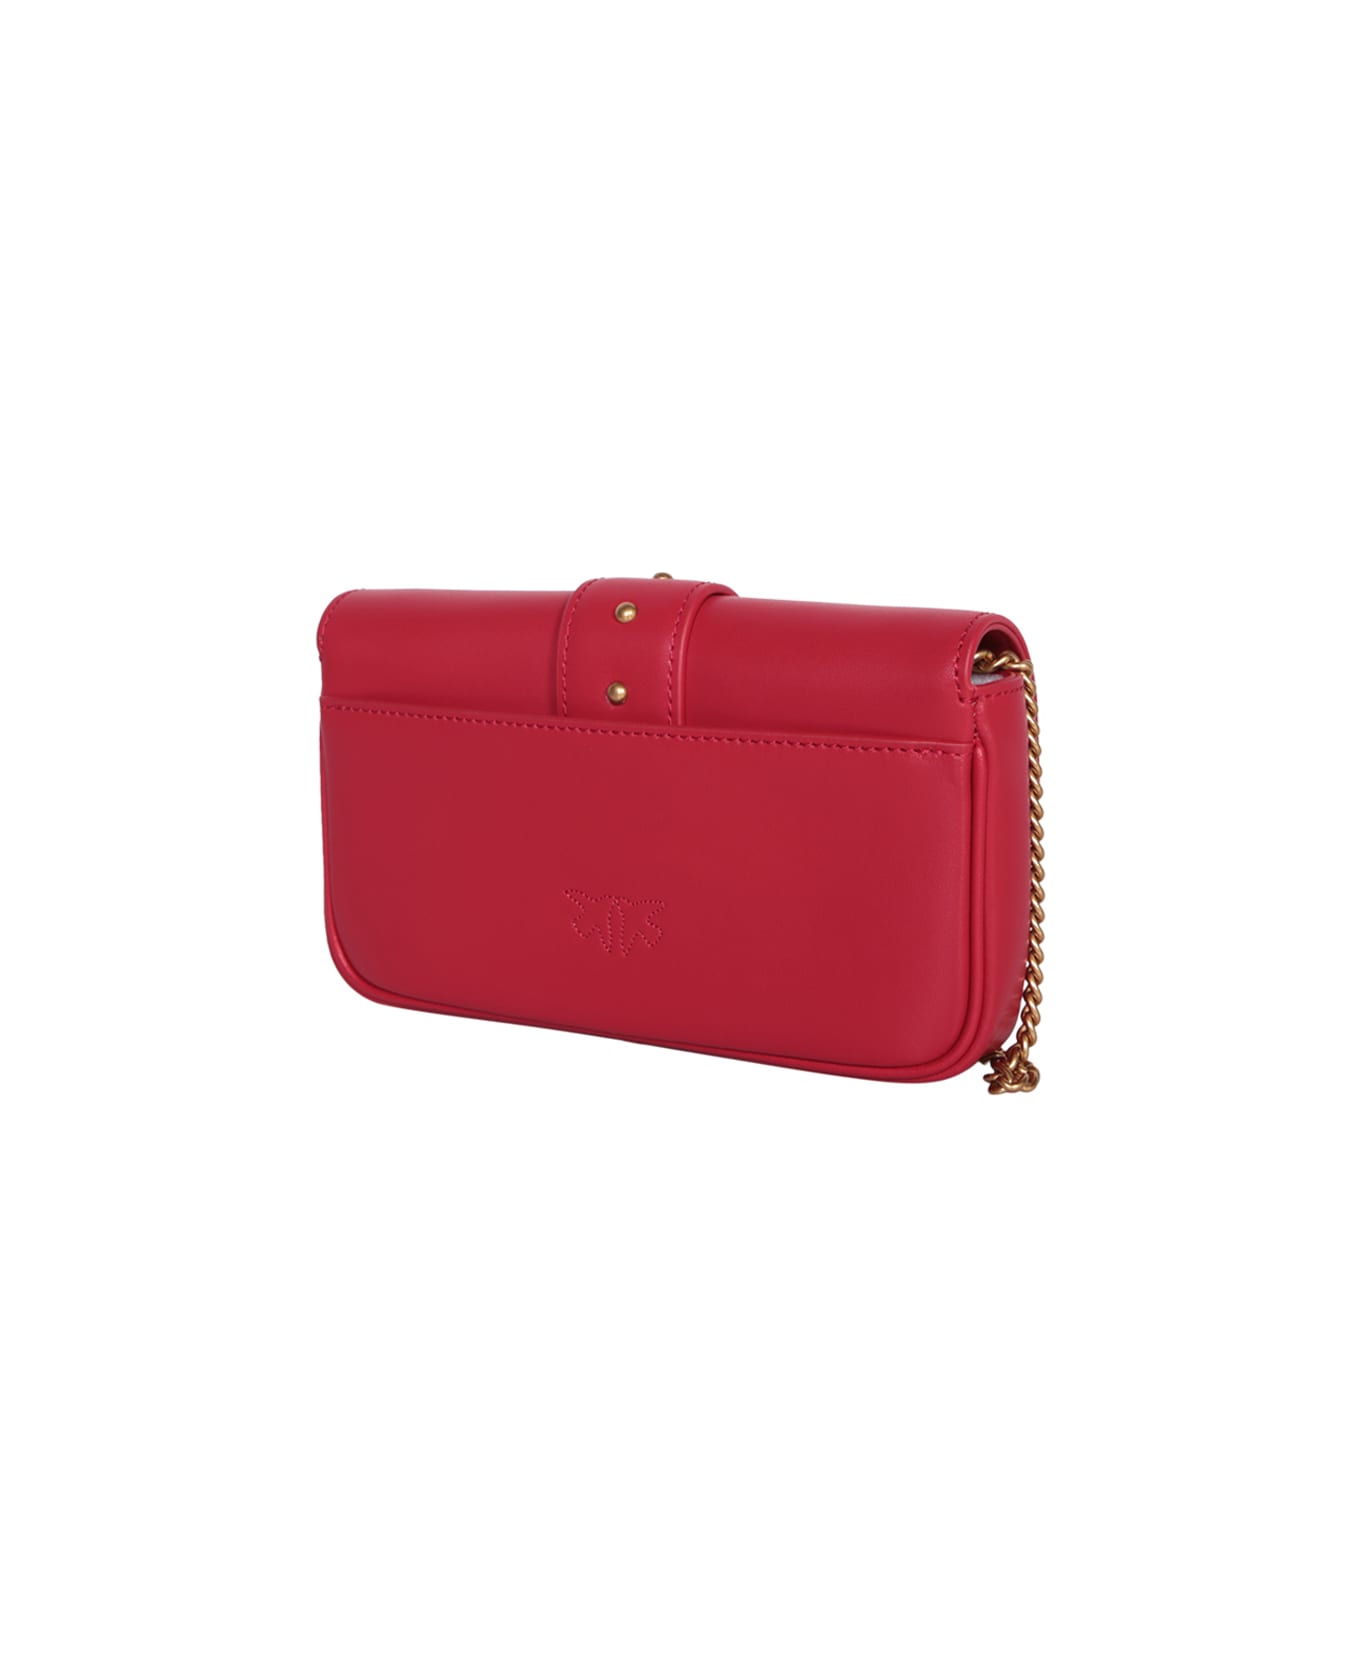 Pinko Love One Pocket Red Bag - Red ショルダーバッグ